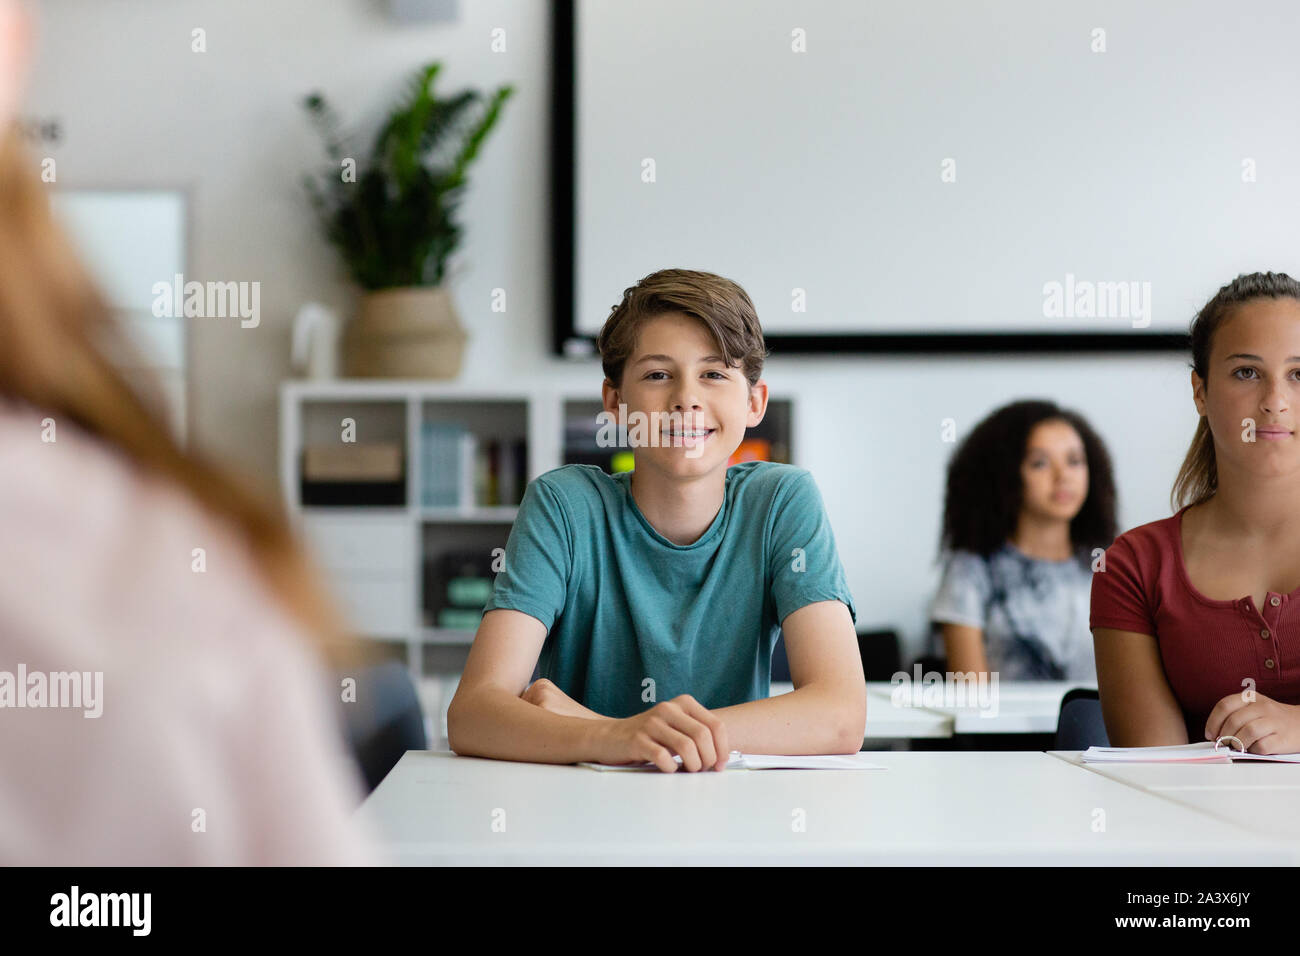 Portrait of male high school student in class Stock Photo